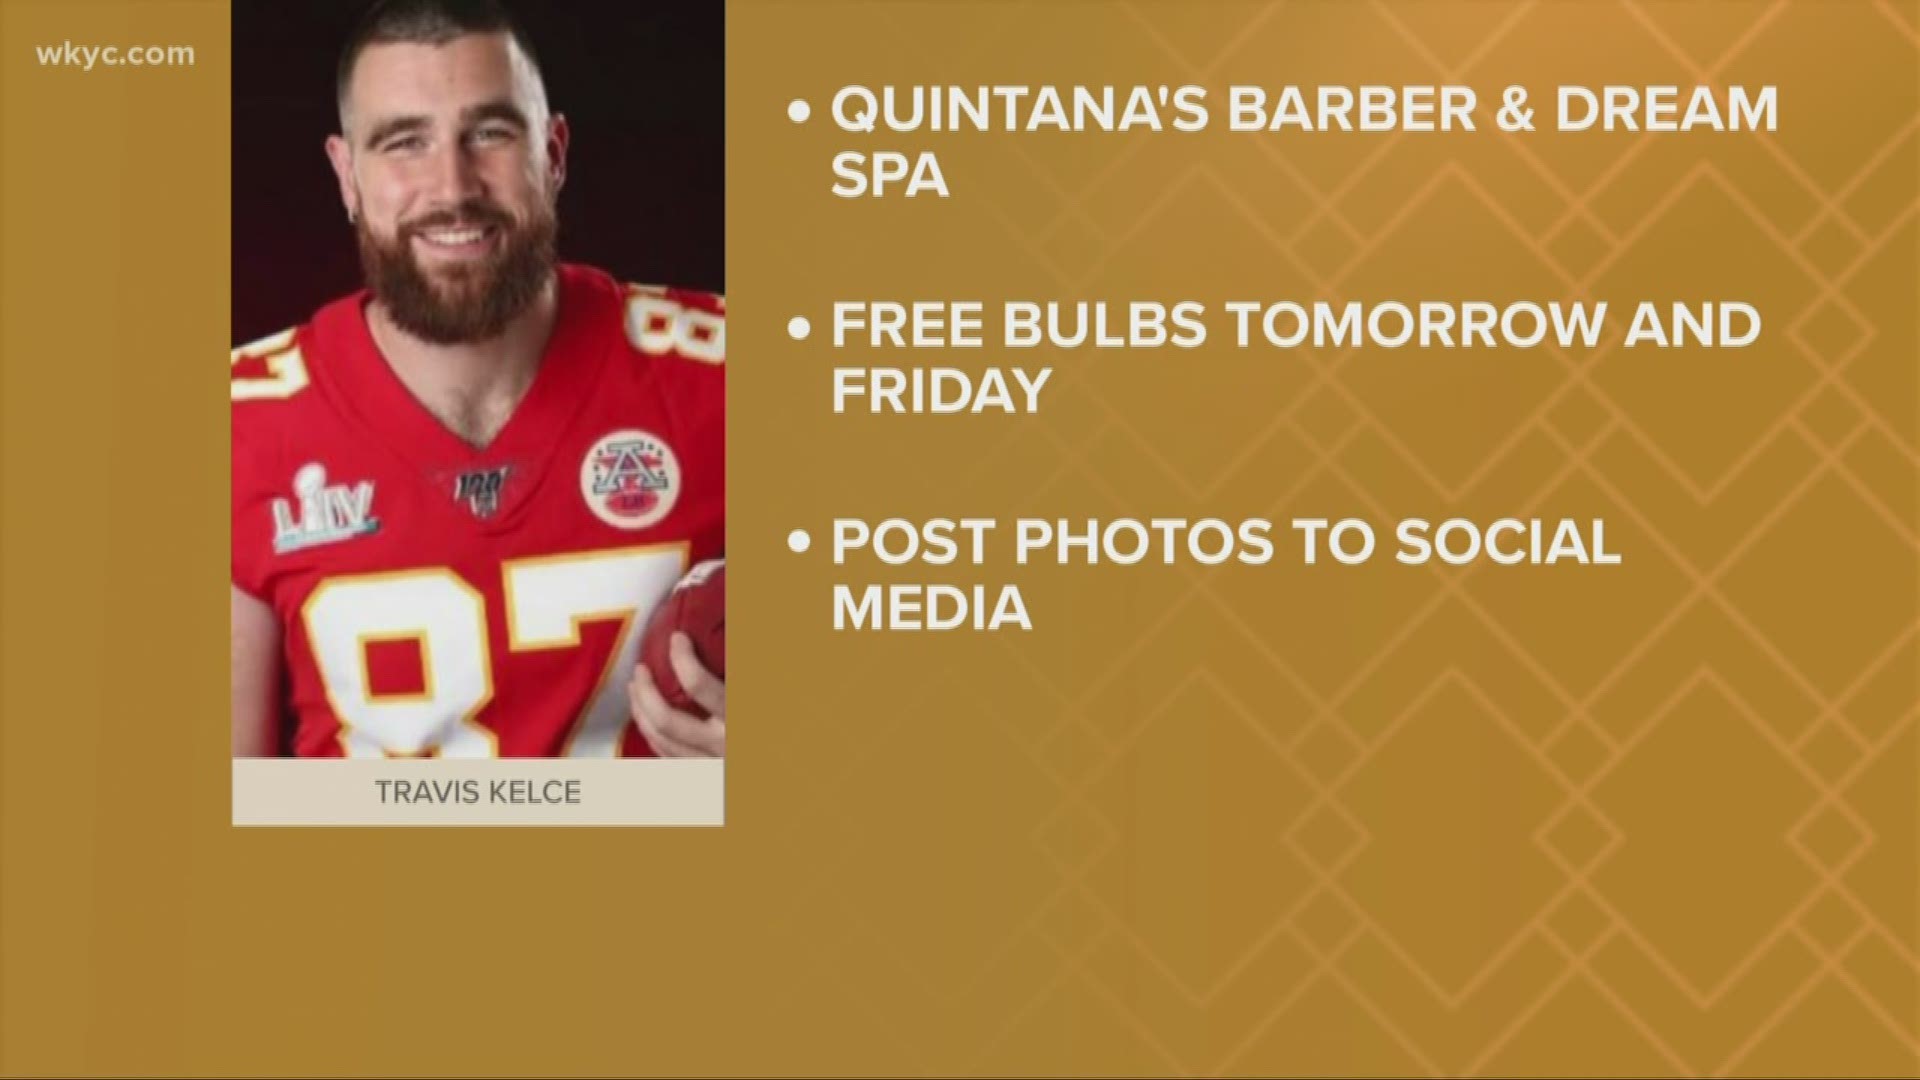 30-year-old Travis Kelce, who attended Cleveland Heights High School, is a tight end for the Kansas City Chiefs, and the community is excited he's in the Super Bowl.